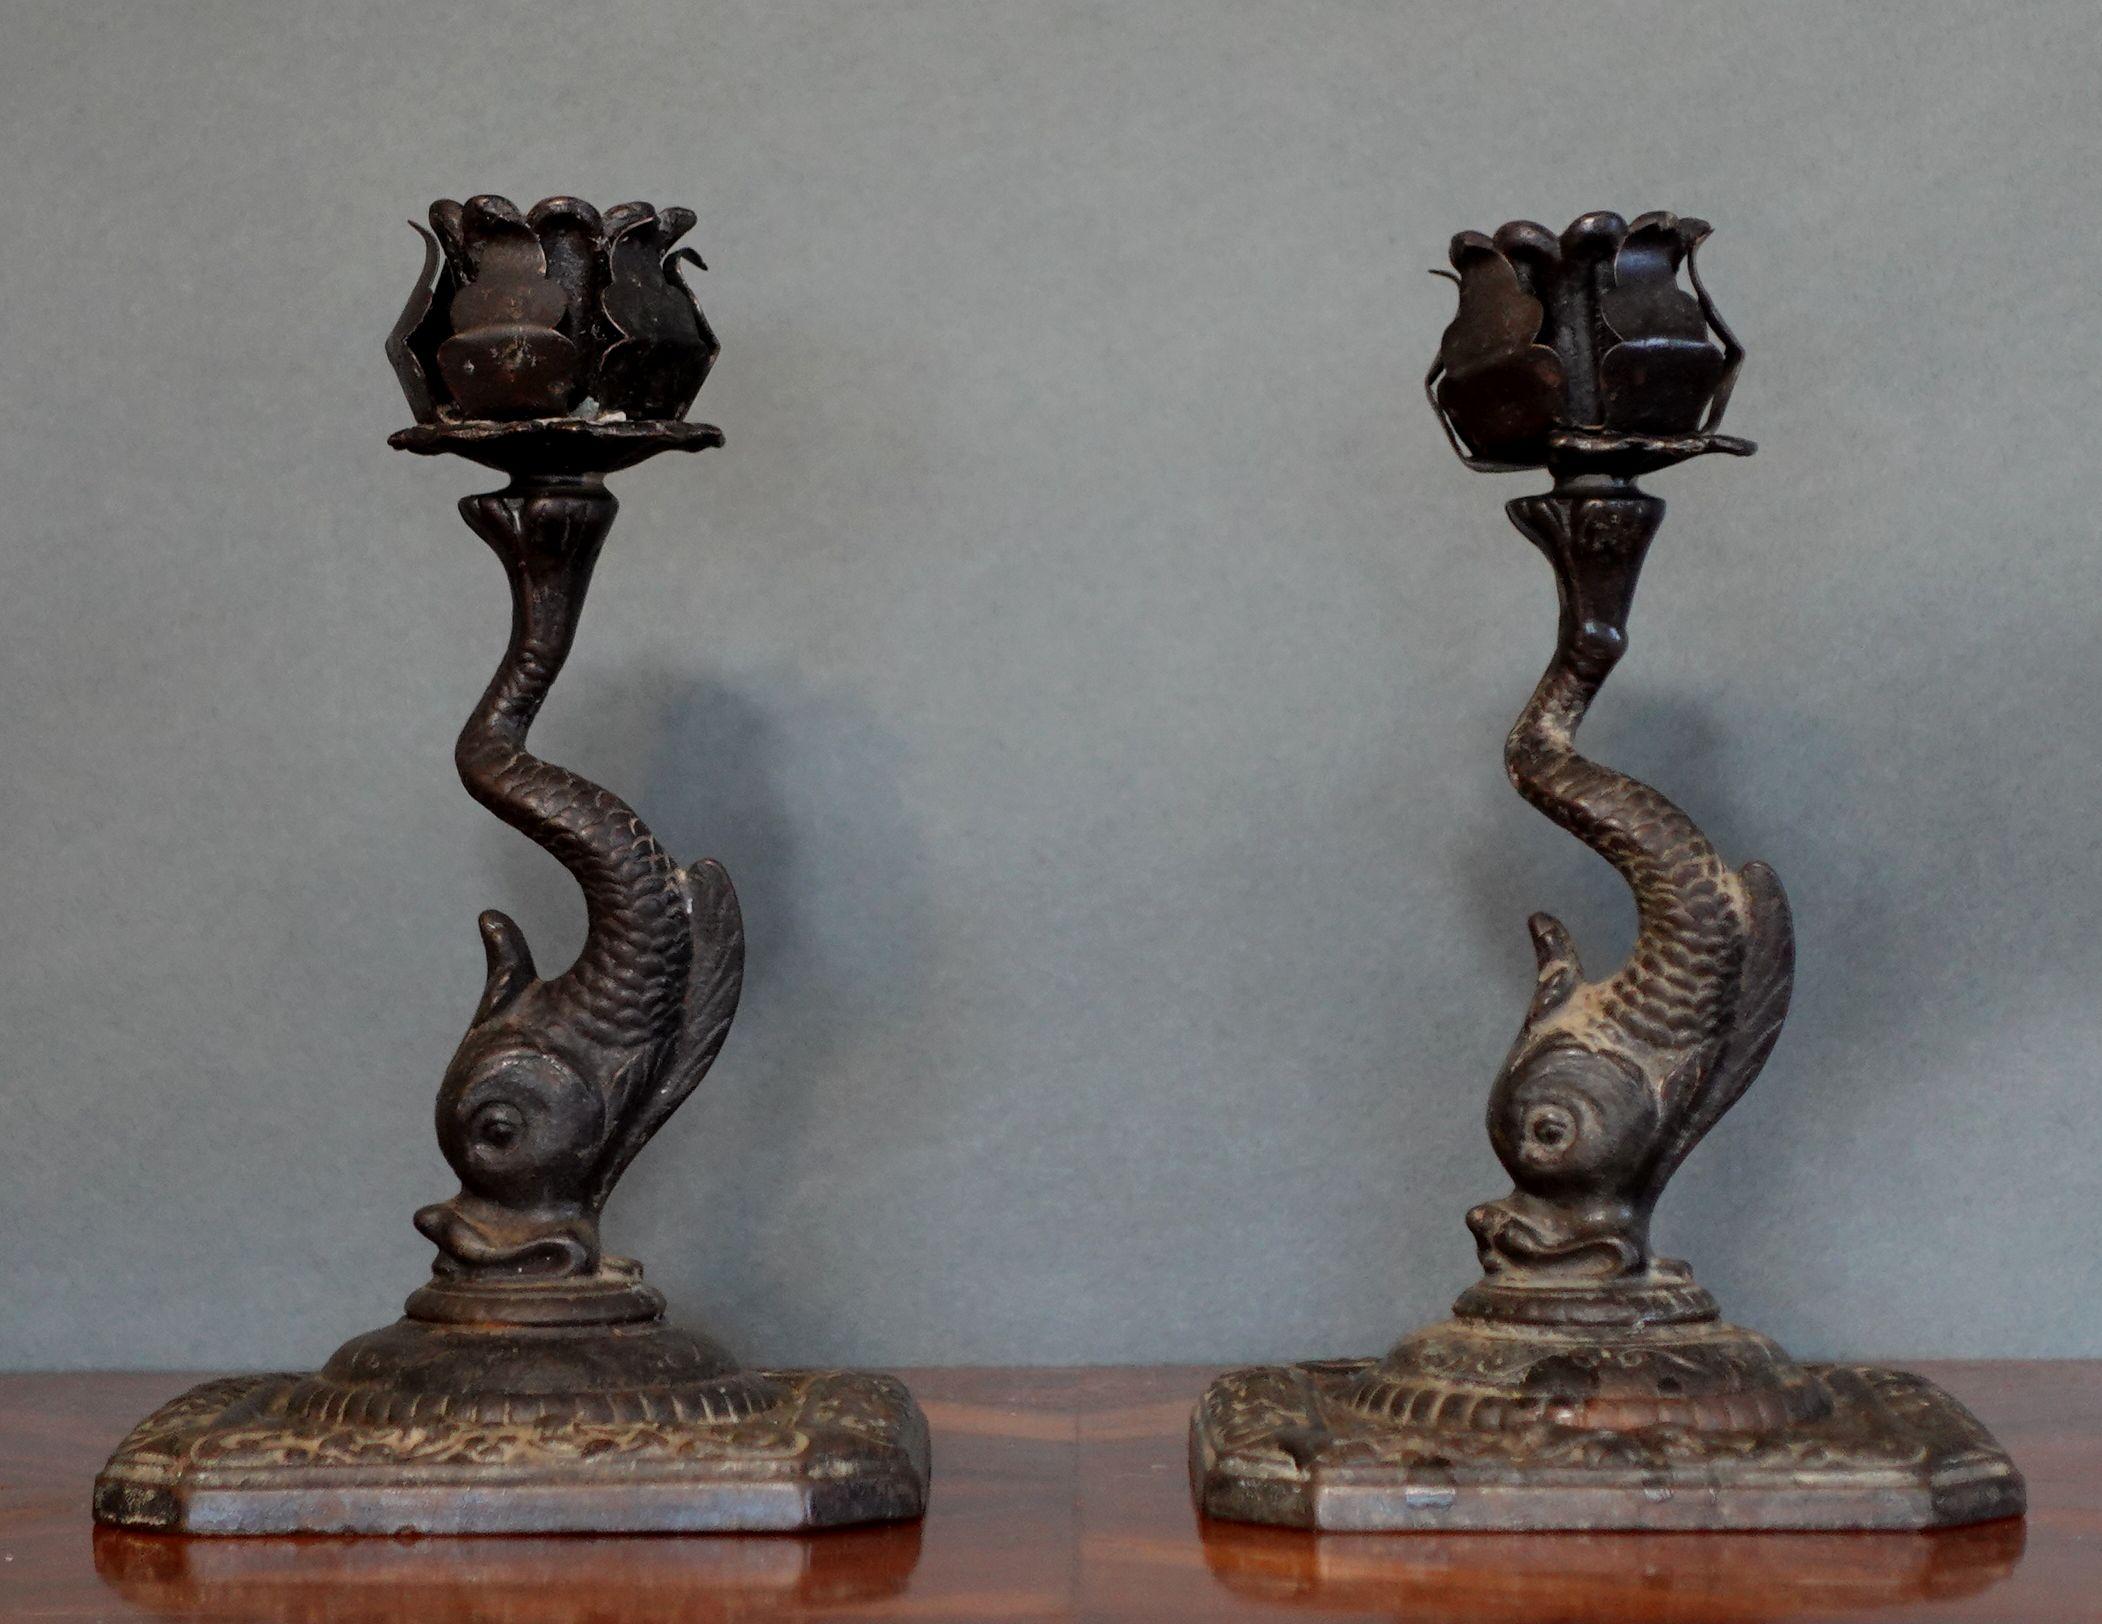 A pair of candlesticks made of wrought iron with flower shapes at the top of each holder.
Under the flower heads, there are winding fish shapes below and the fish heads attached to the square bases.
Very old pieces and unique art pieces.